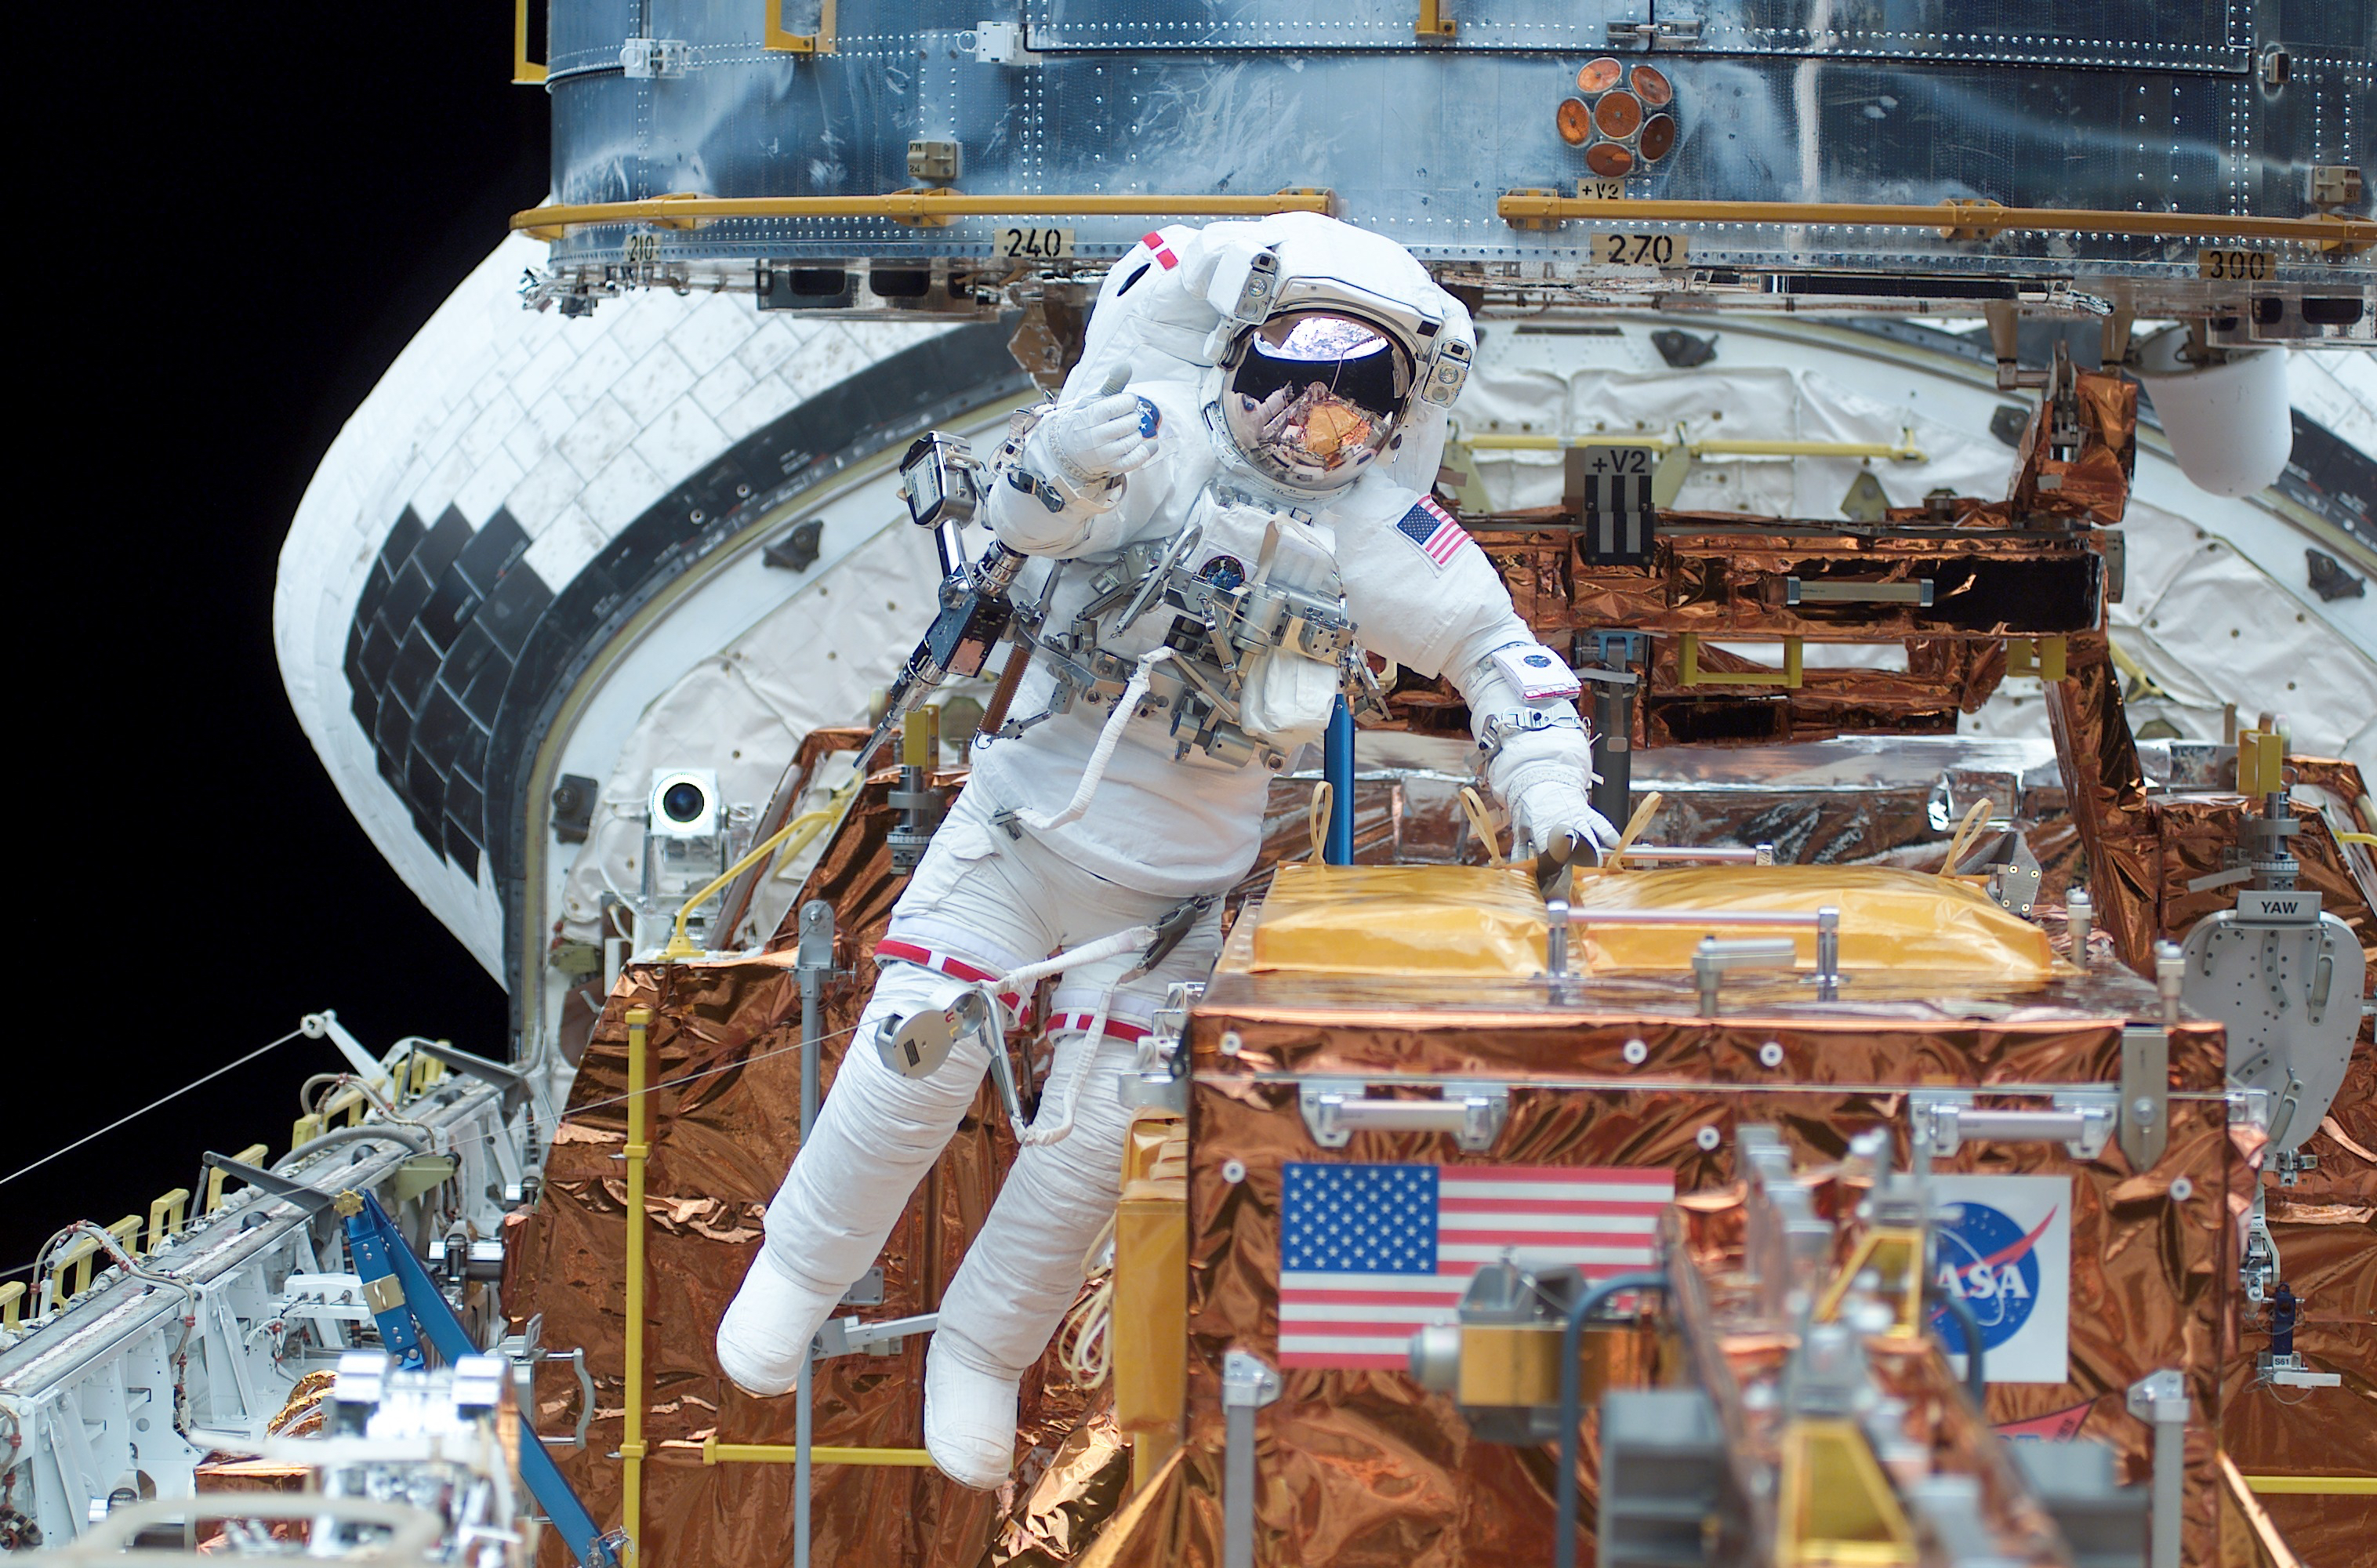 An astronaut floats in the cargo bay next to a gold carrier.